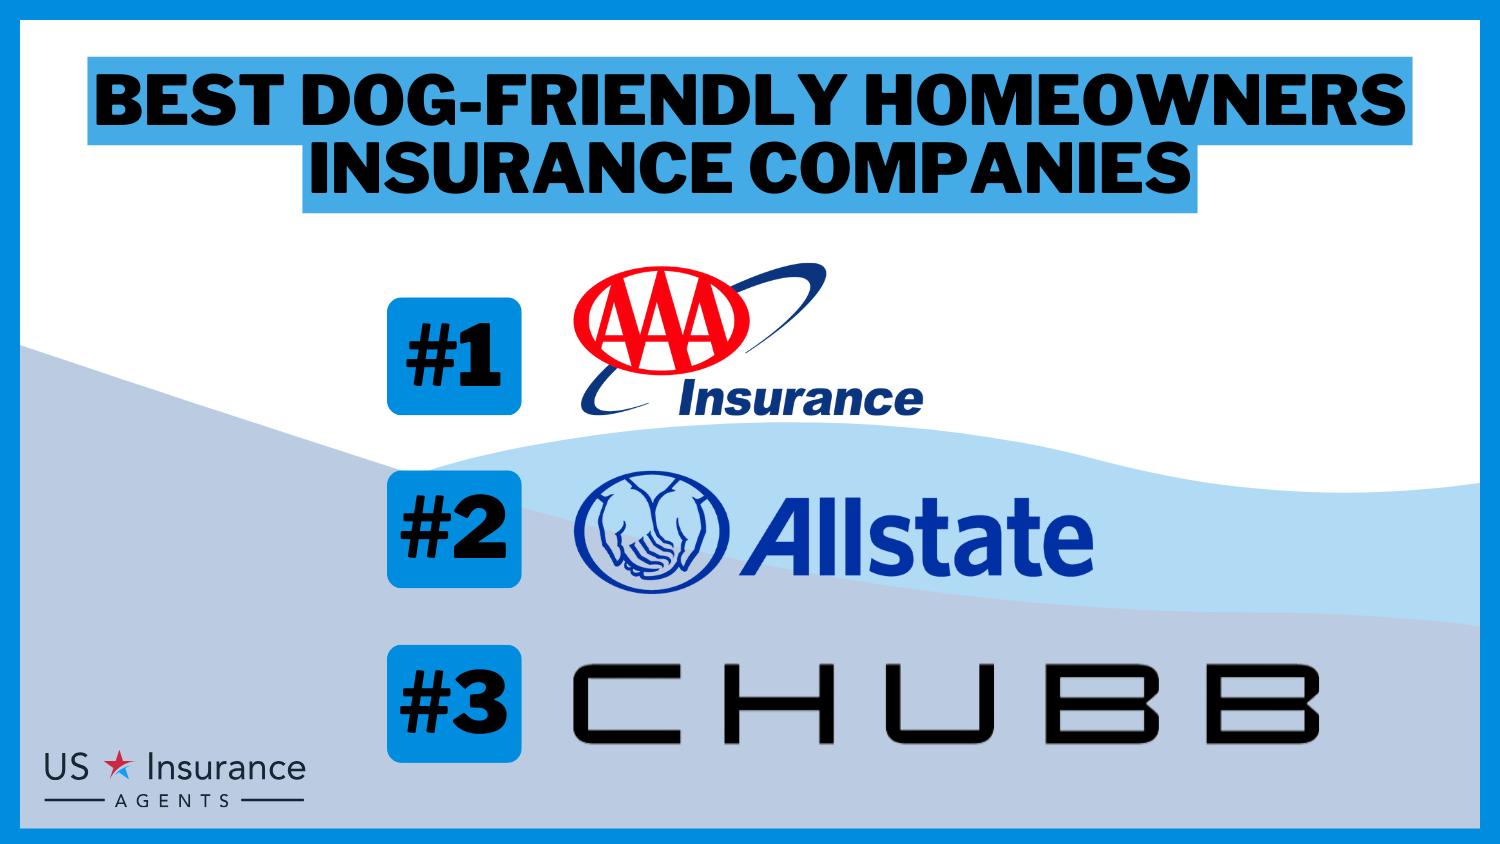 Best Dog-Friendly Homeowners Insurance Companies: AAA, Allstate, and Chubb.